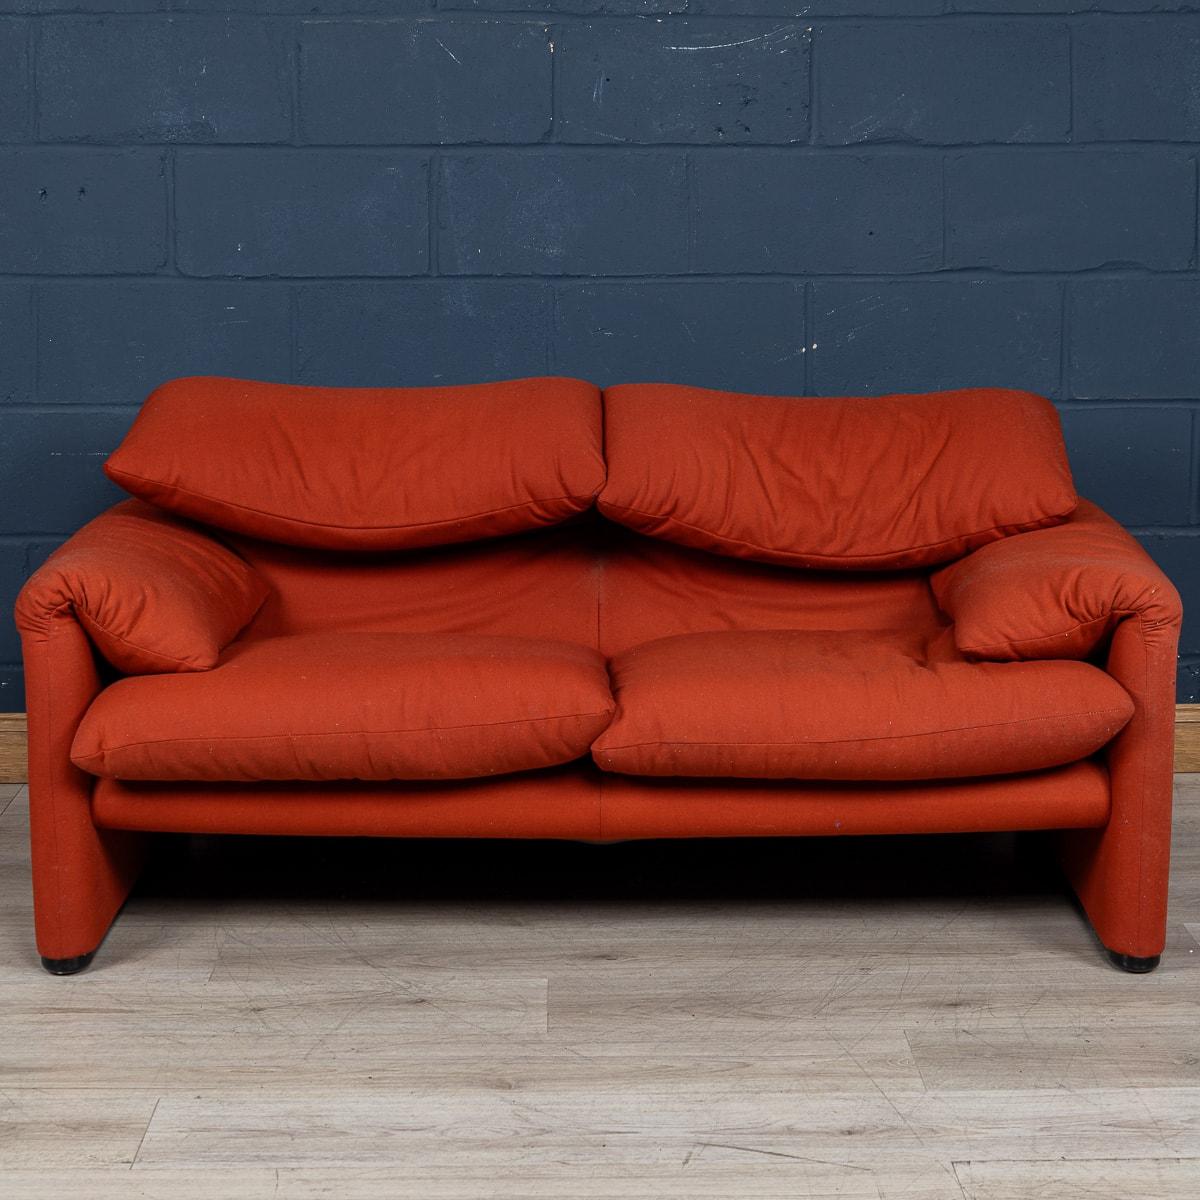 A 2-seater “675 Maralunga” sofa in red fabric. The Maralunga sofa was designed by Vico Magistretti in the early 1970s for Cassina. Cosy and adaptable, the ever cool sofa was an instant classic. Comfort comes in 2 forms with a backrests that